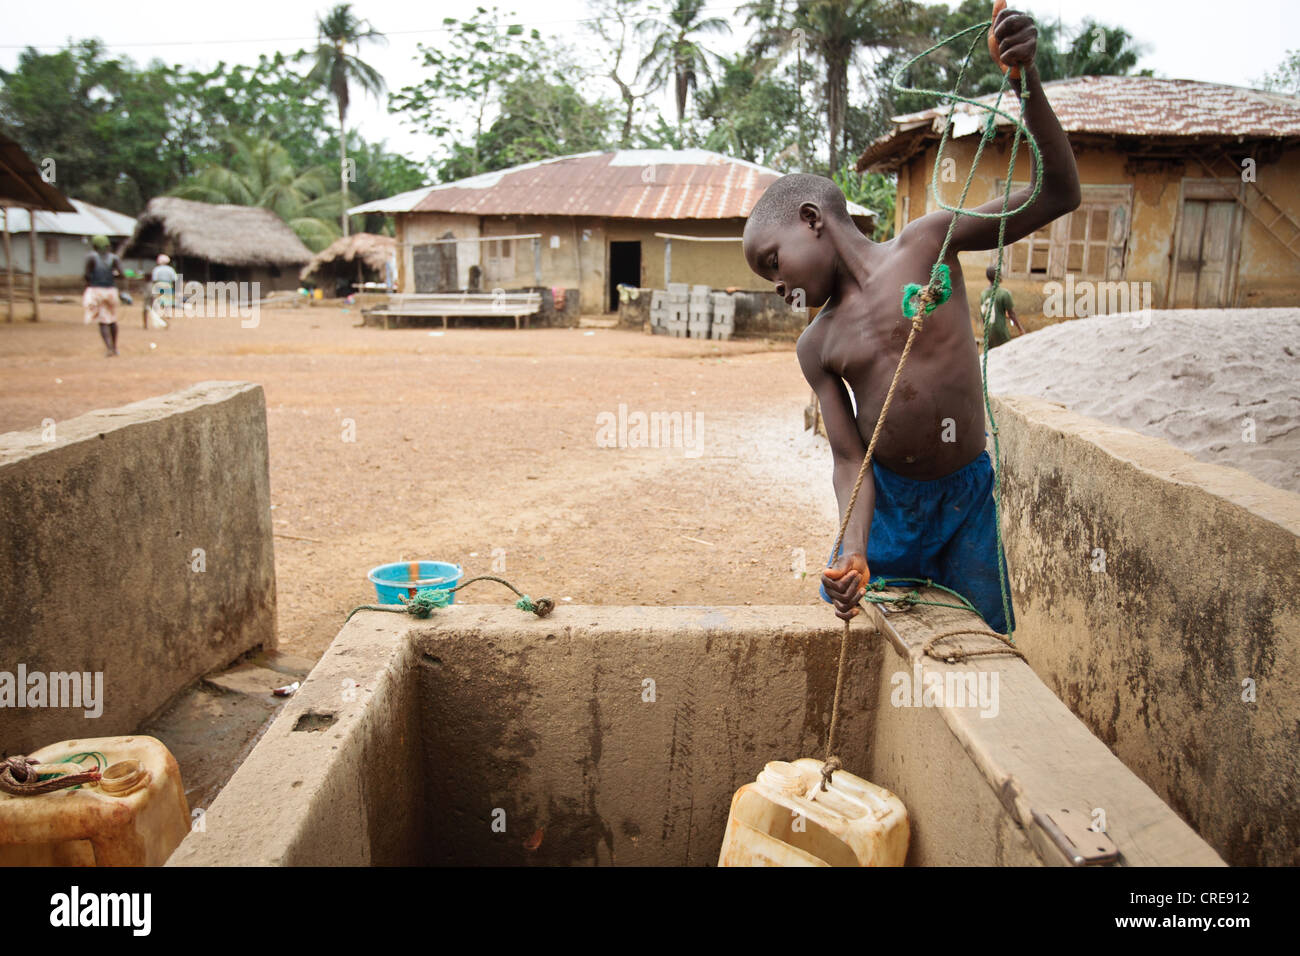 A boy draws water from a well in the village of Kawejah, Grand Cape Mount county, Liberia on Friday April 6, 2012. Stock Photo